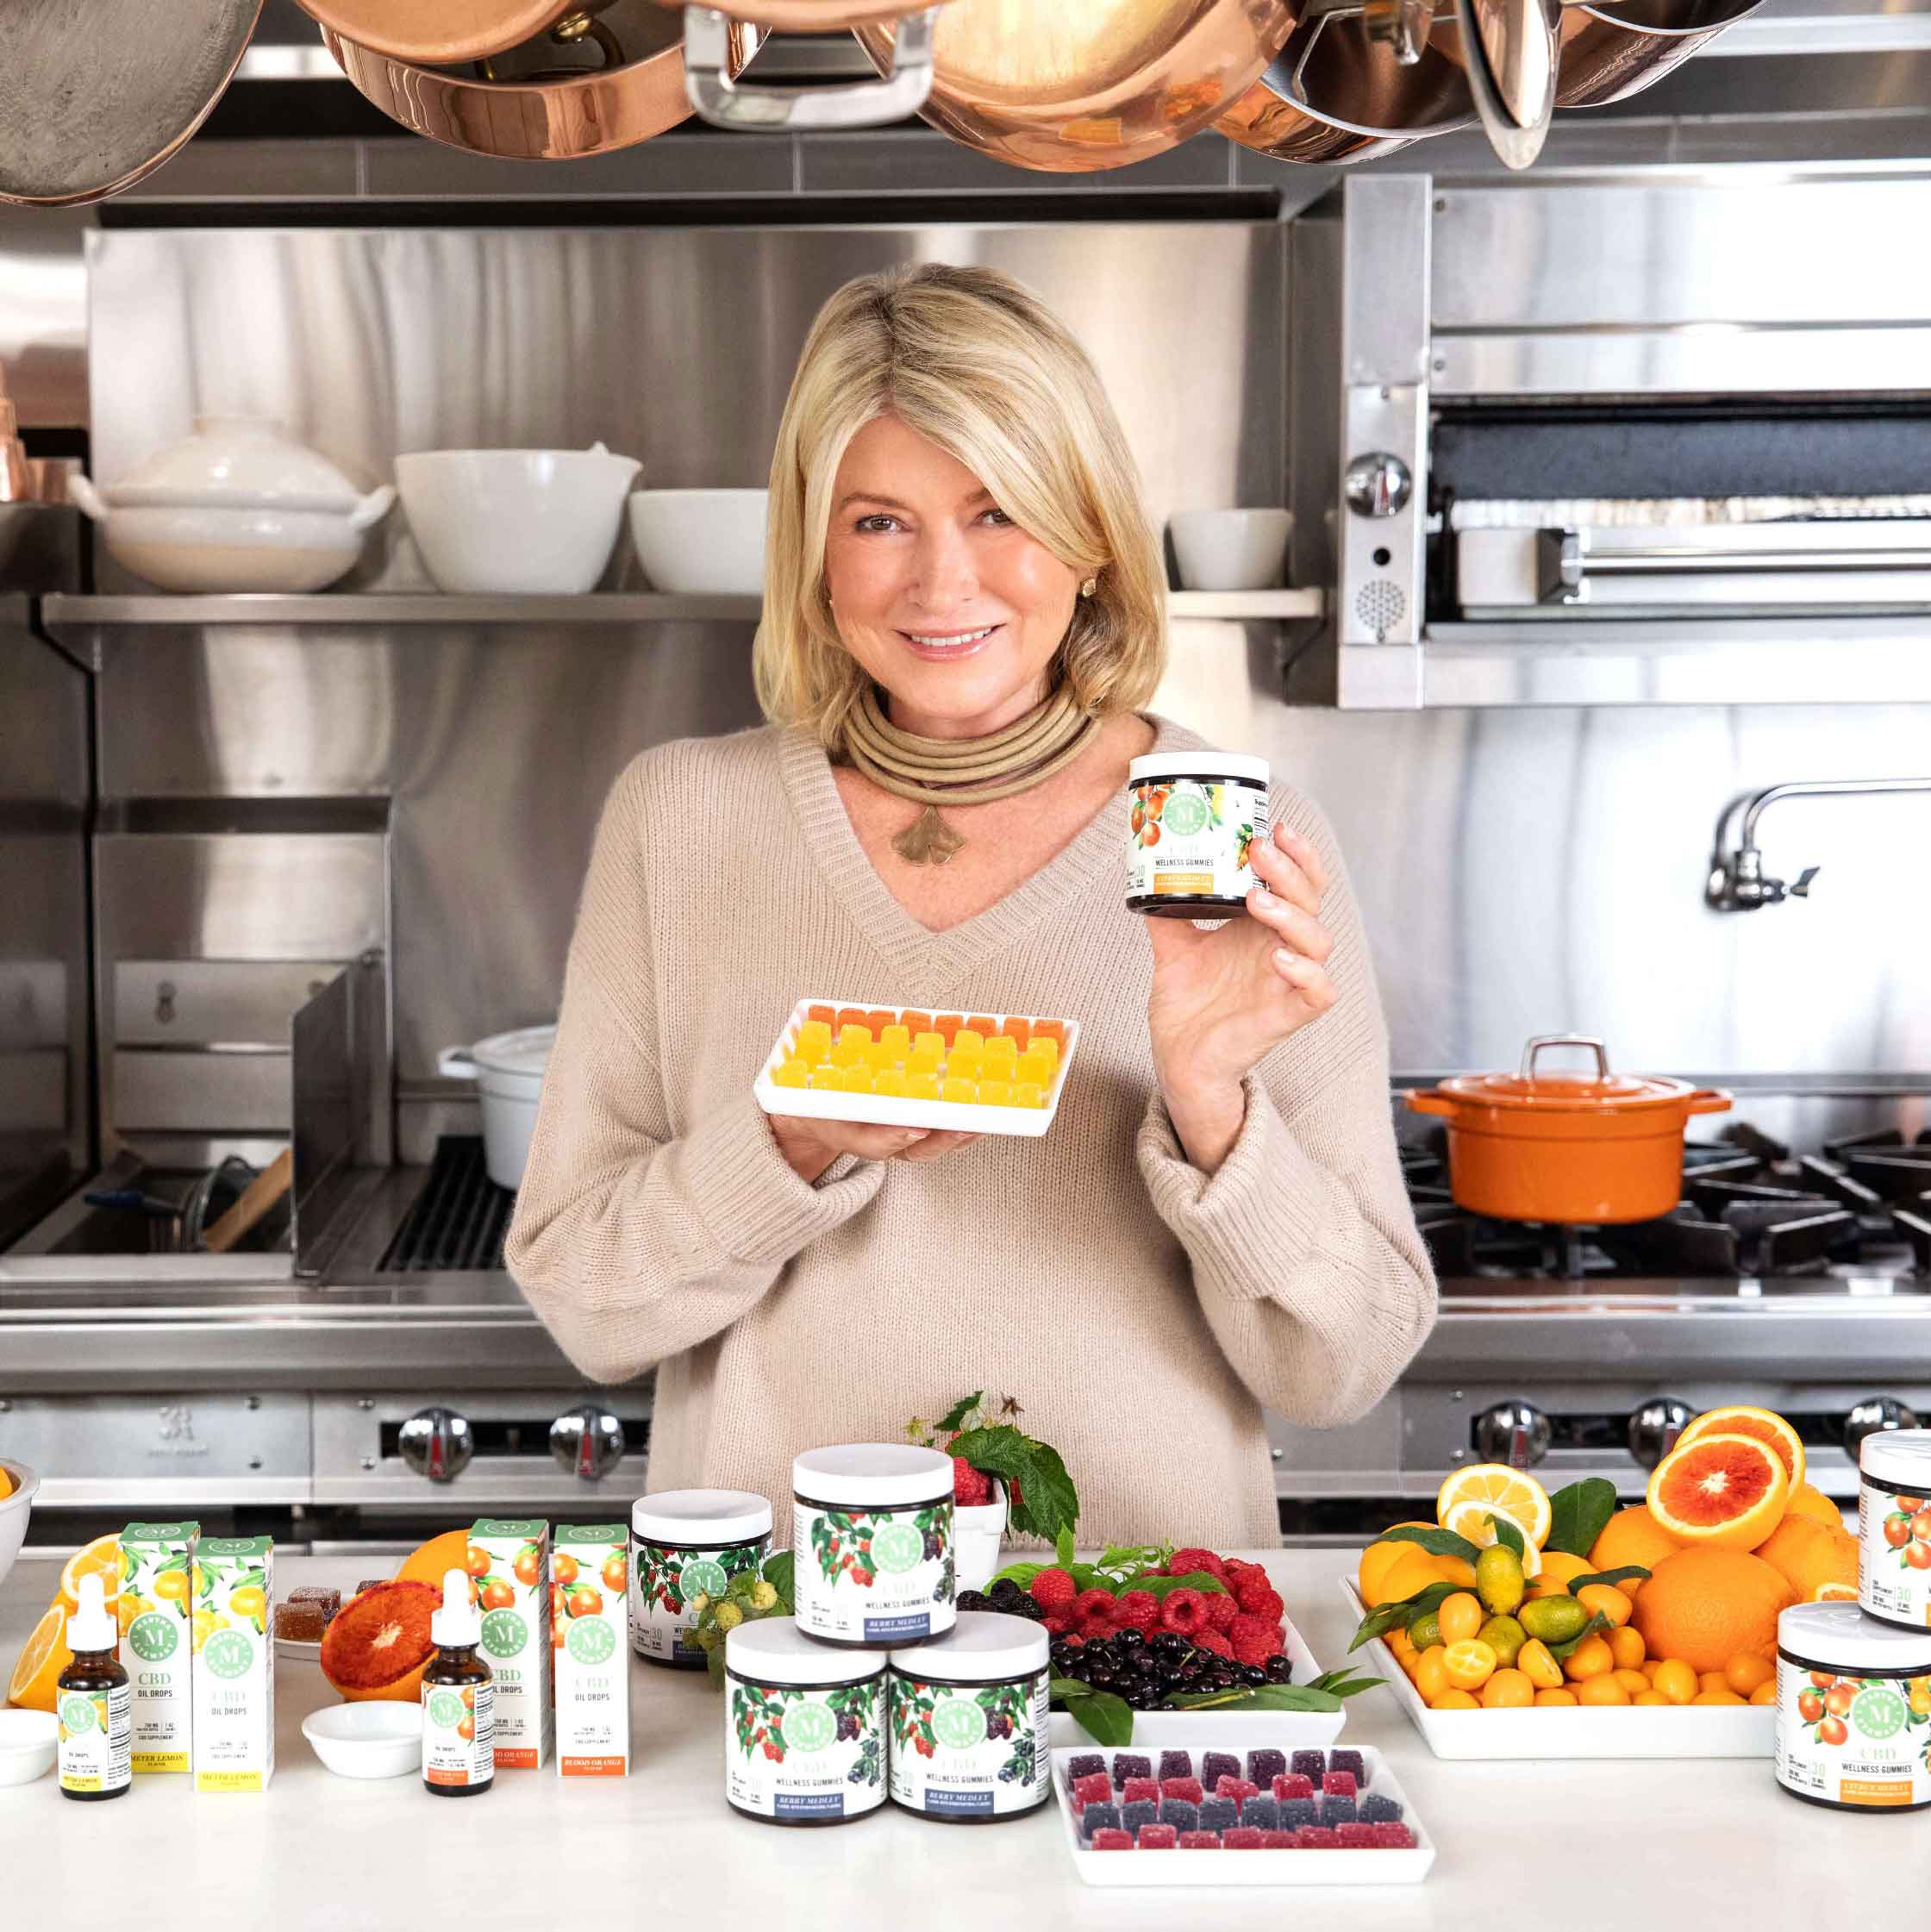 Martha Stewart Says She “Pops 20 CBD Gummies Every Day” and Just Chills